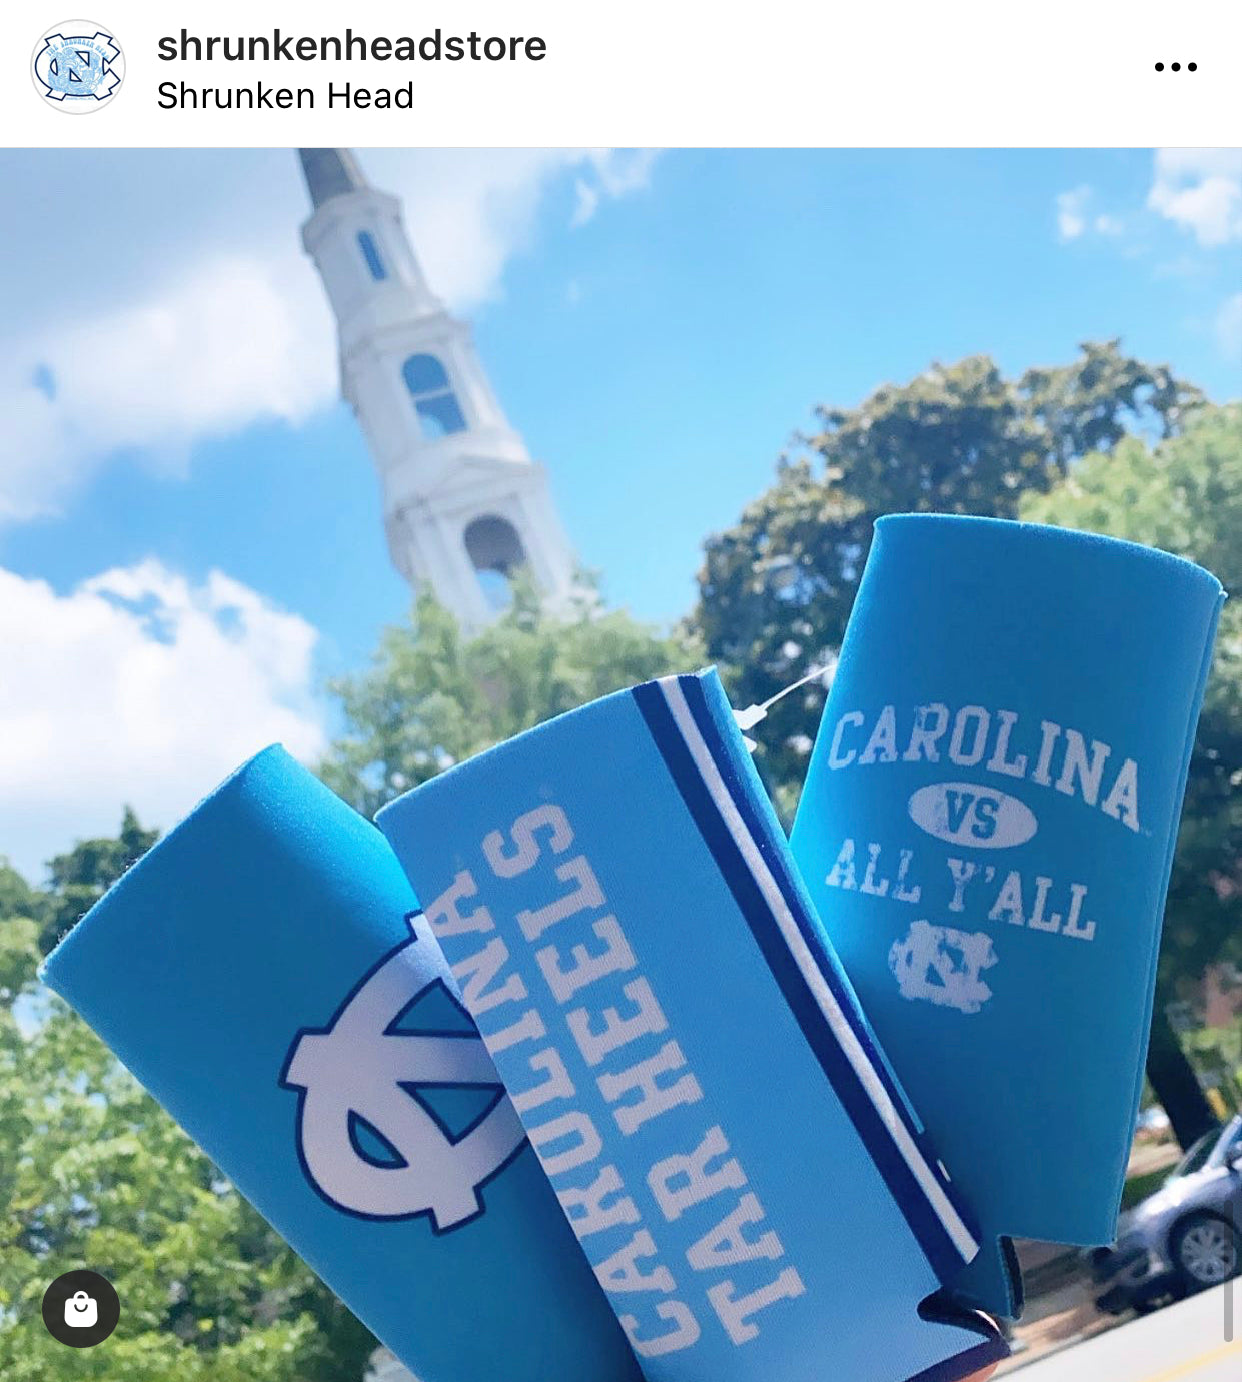 Carolina vs All Y'all Slim Tall Coozie with UNC Logo